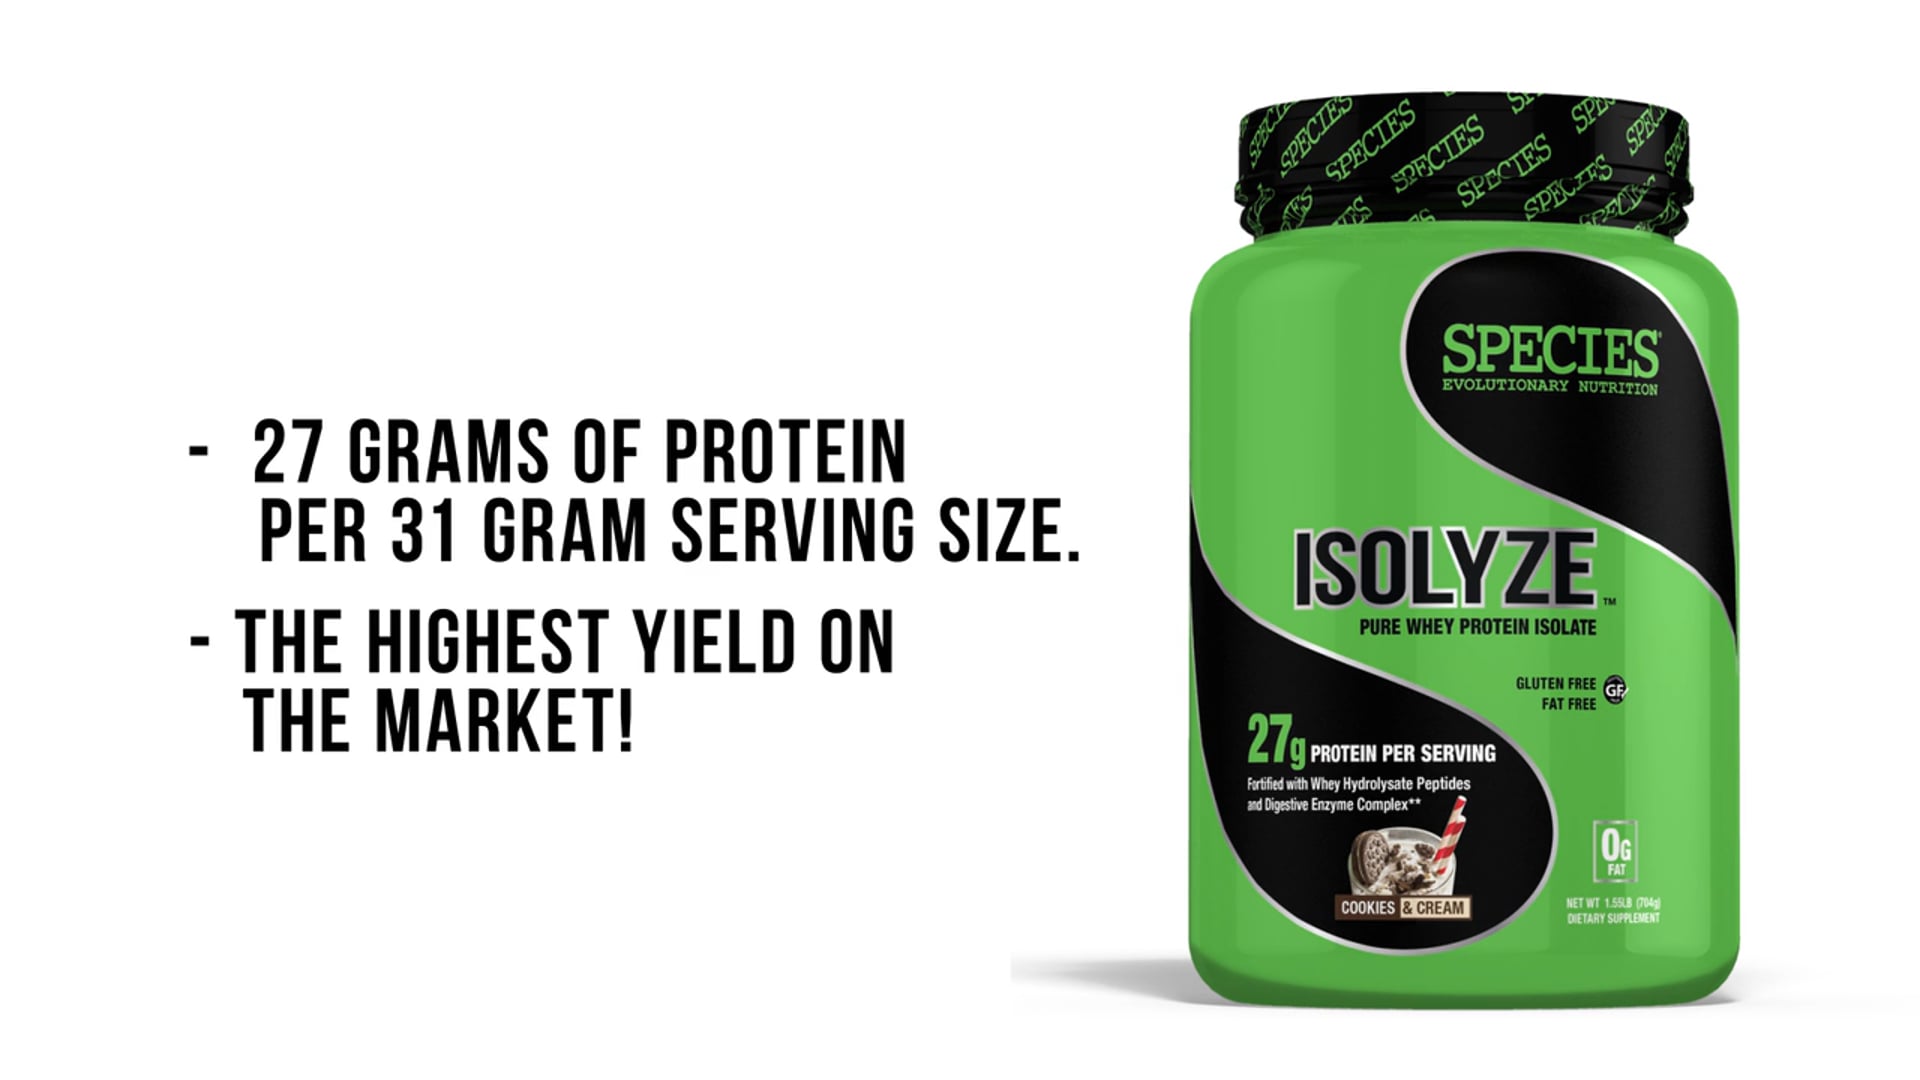 Dave Palumbo Discusses ISOLYZE™ (Whey Protein Isolate) by SPECIES Nutrition